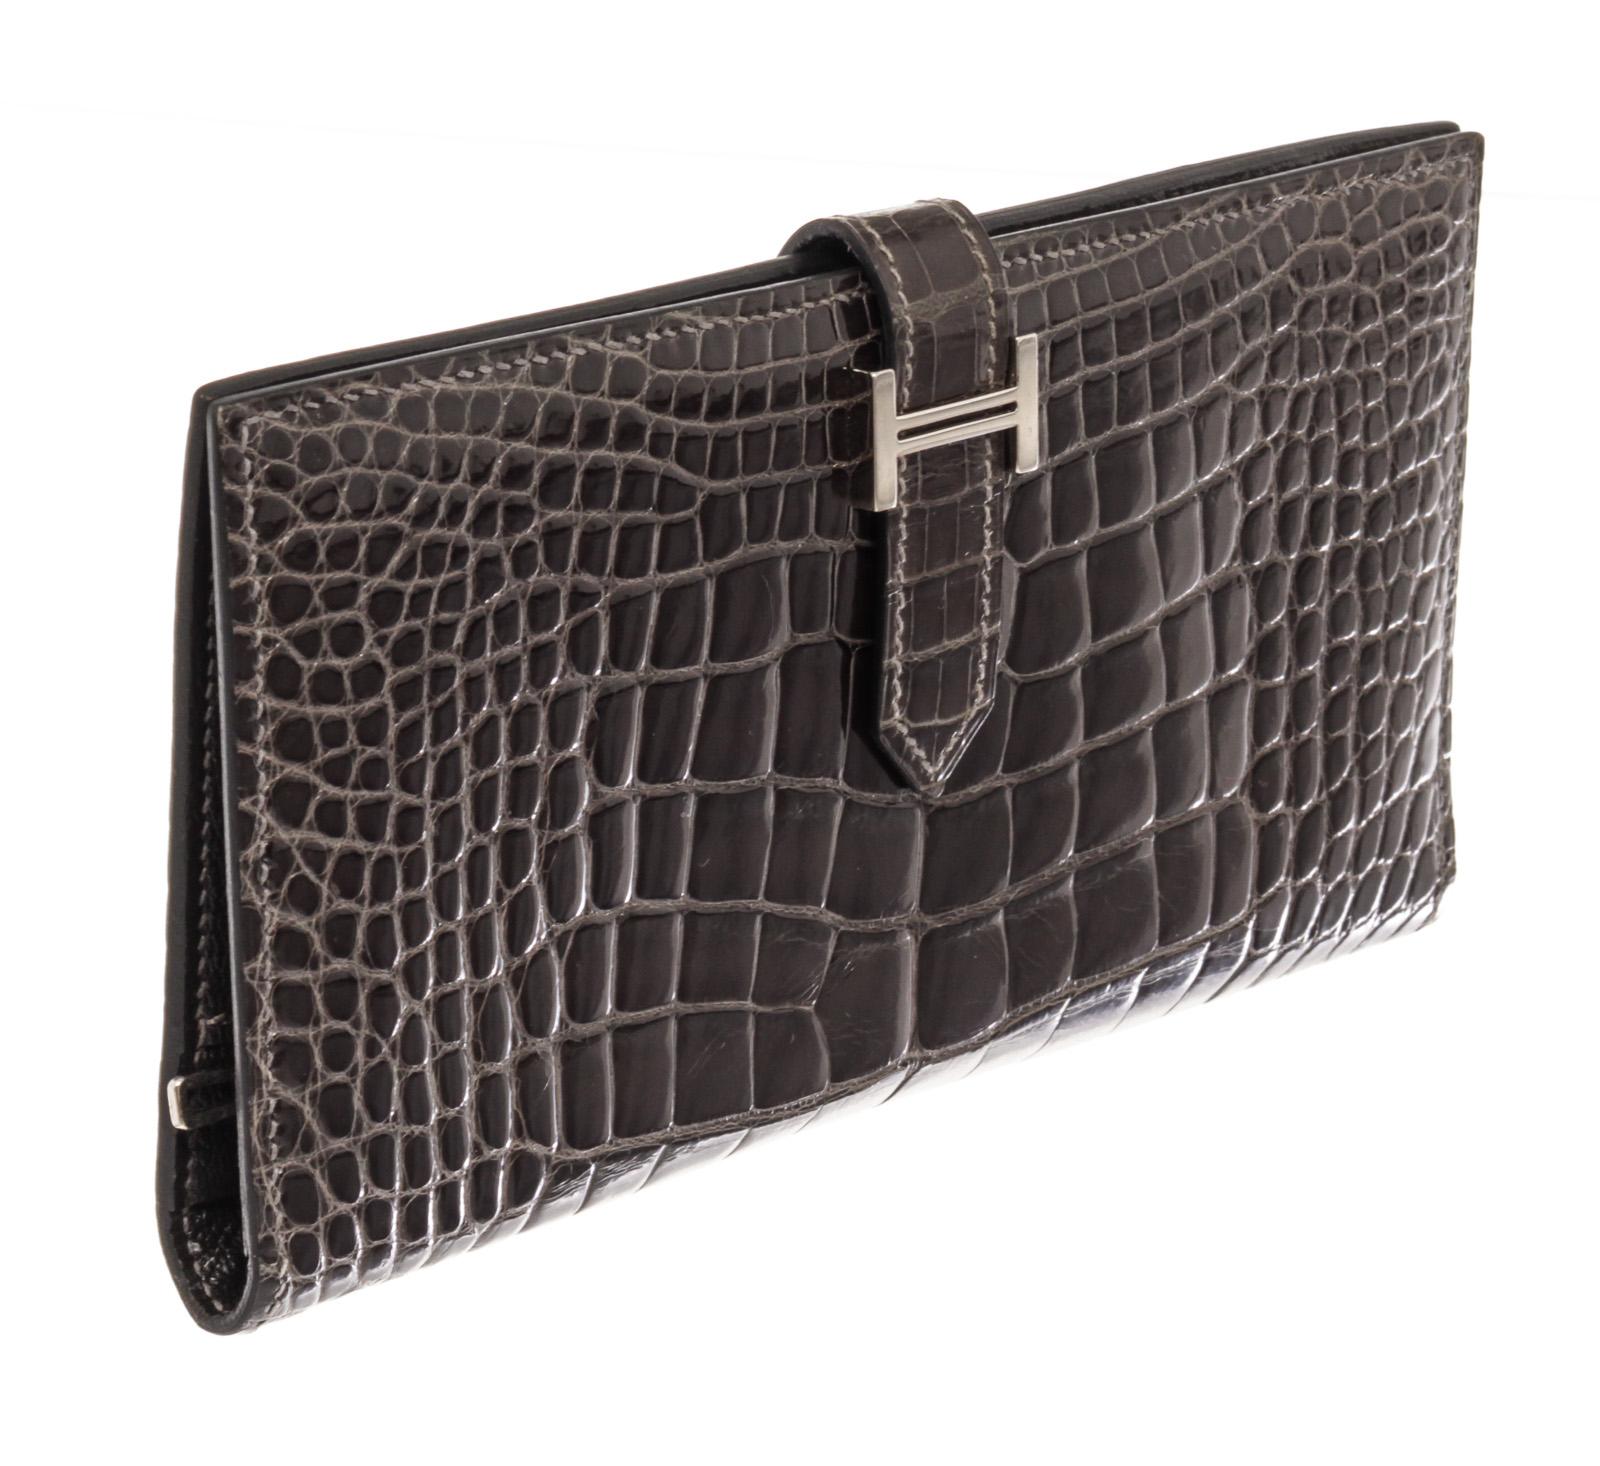 Hermes Bearn Wallet is cone in shiny black Alligator leather, featuring a bifold design and a silver-tone strap closure. The interior is crafter in black Chevre Leather, featuring five card slip pockets, two slip pockets for paper currency, one zip